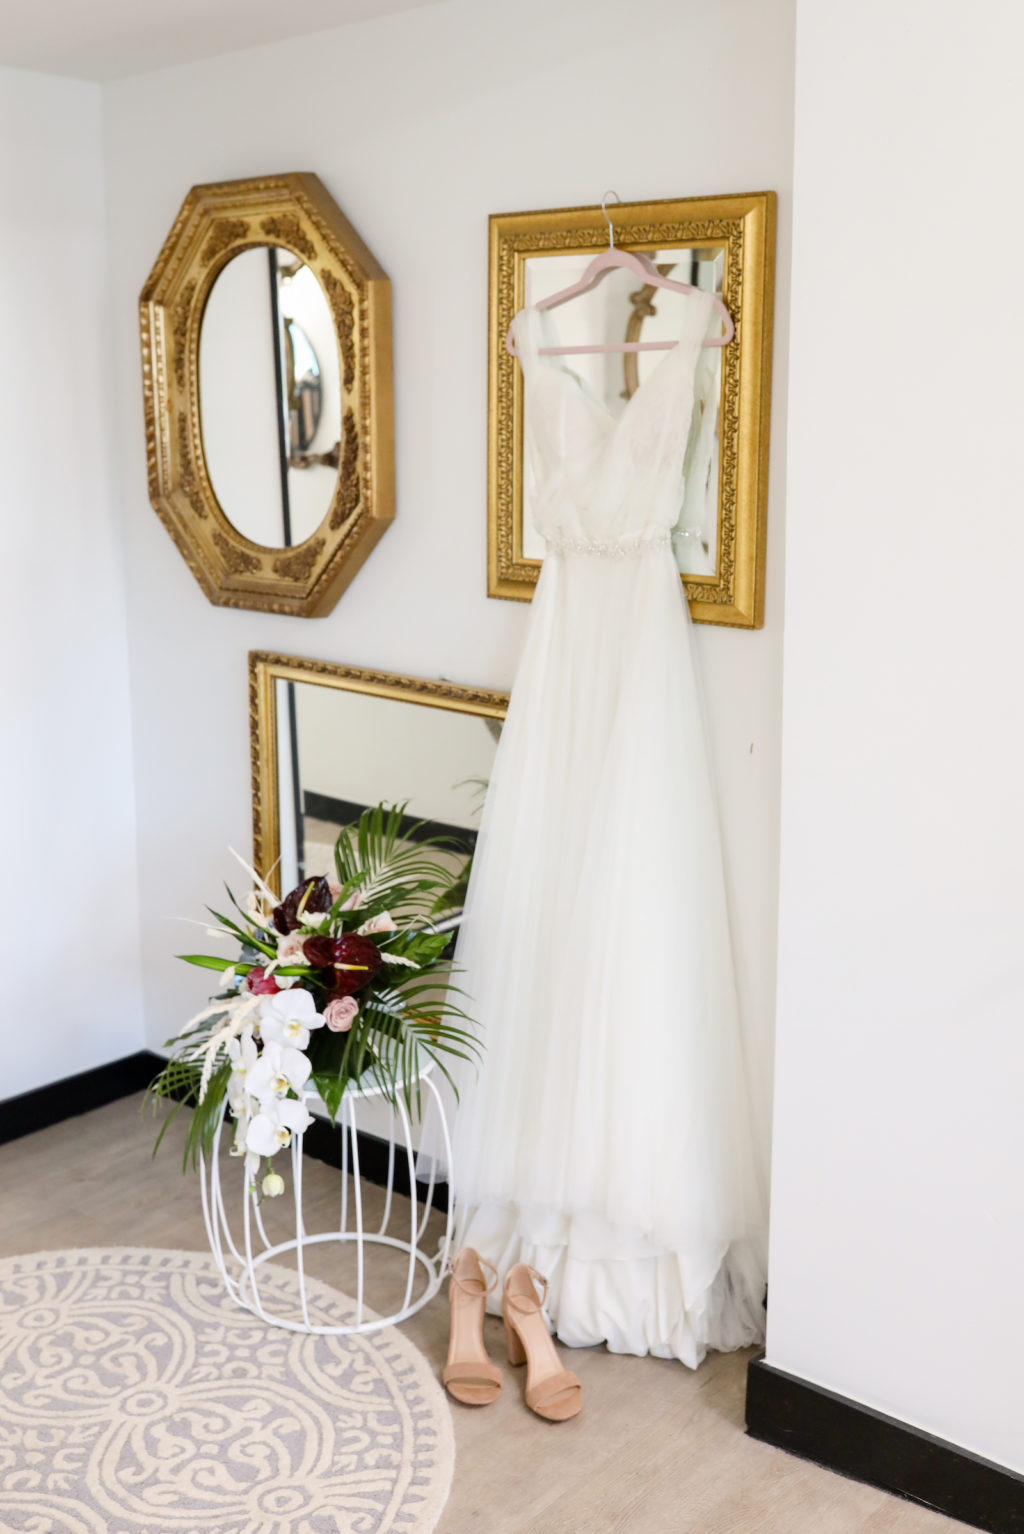 Boho Tulle Wedding Dress Hanging on Frame, Tropical White Orchids and Burgundy Floral with Palm Fronds Bouquet, Nude Wedding Shoes | Tampa Bay Wedding Photographer Lifelong Photography Studio | Wedding Florist Iza's Flowers